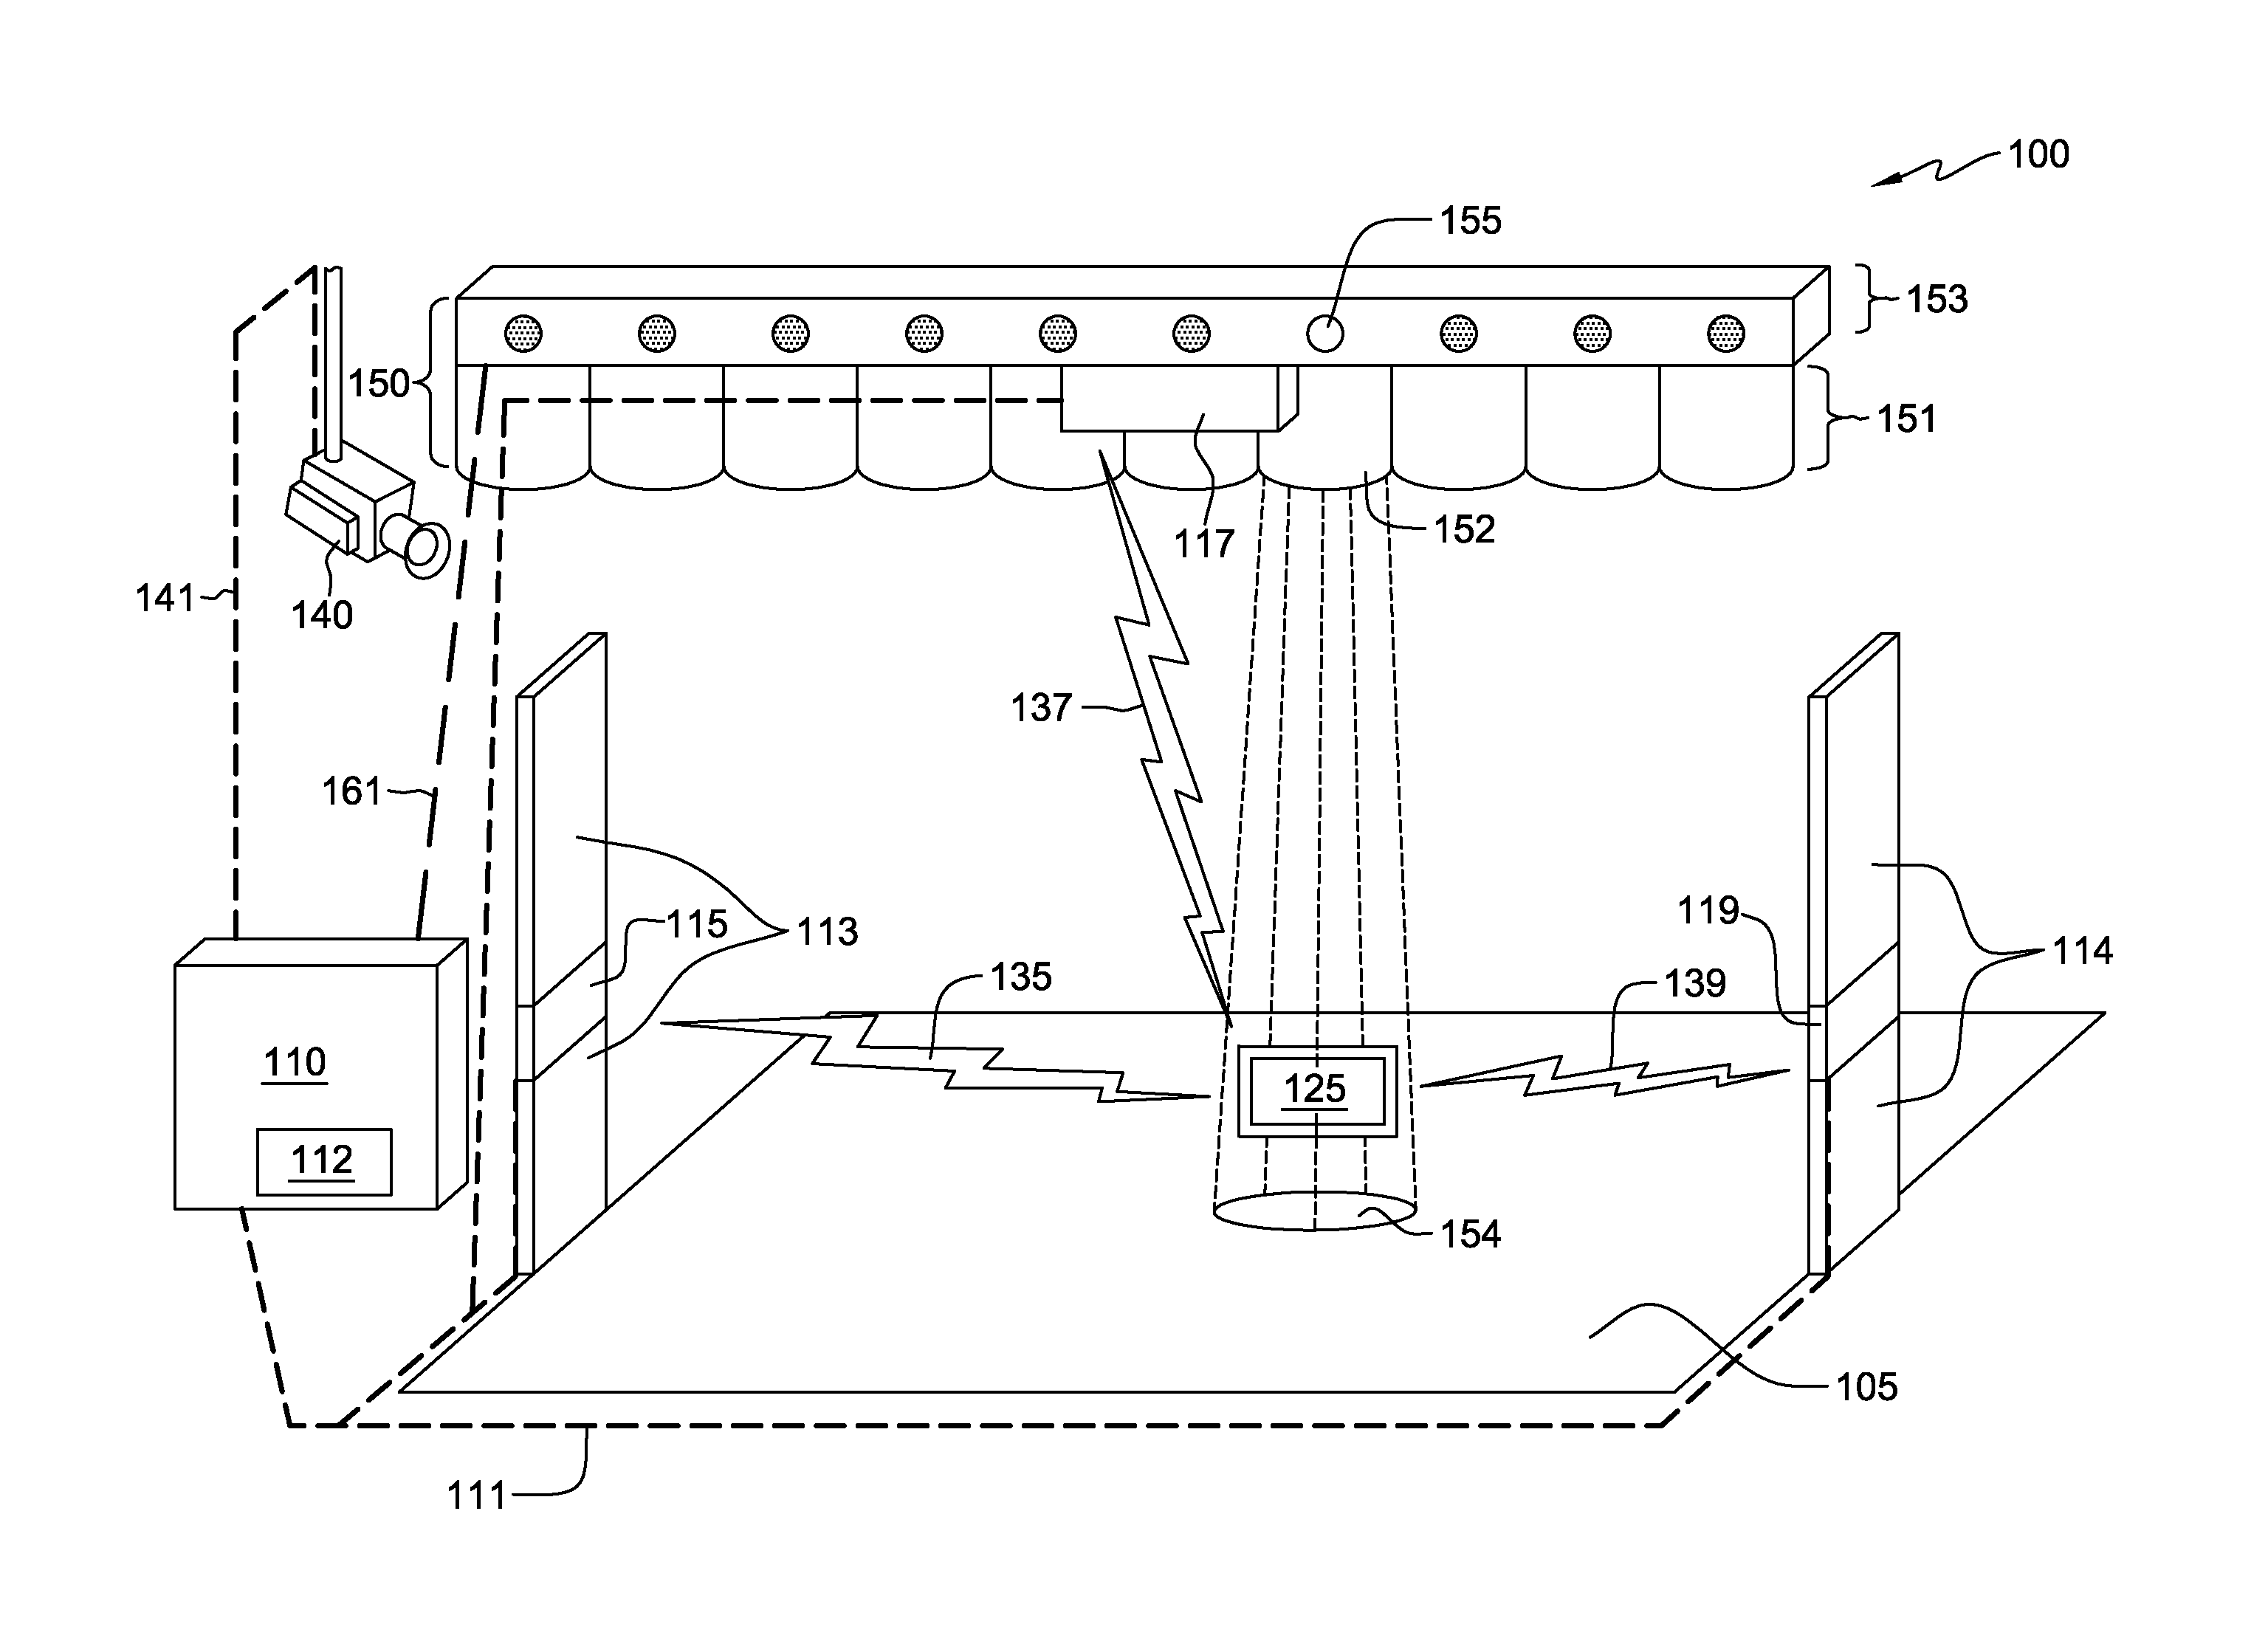 Apparatus for indicating the location of a signal emitting tag